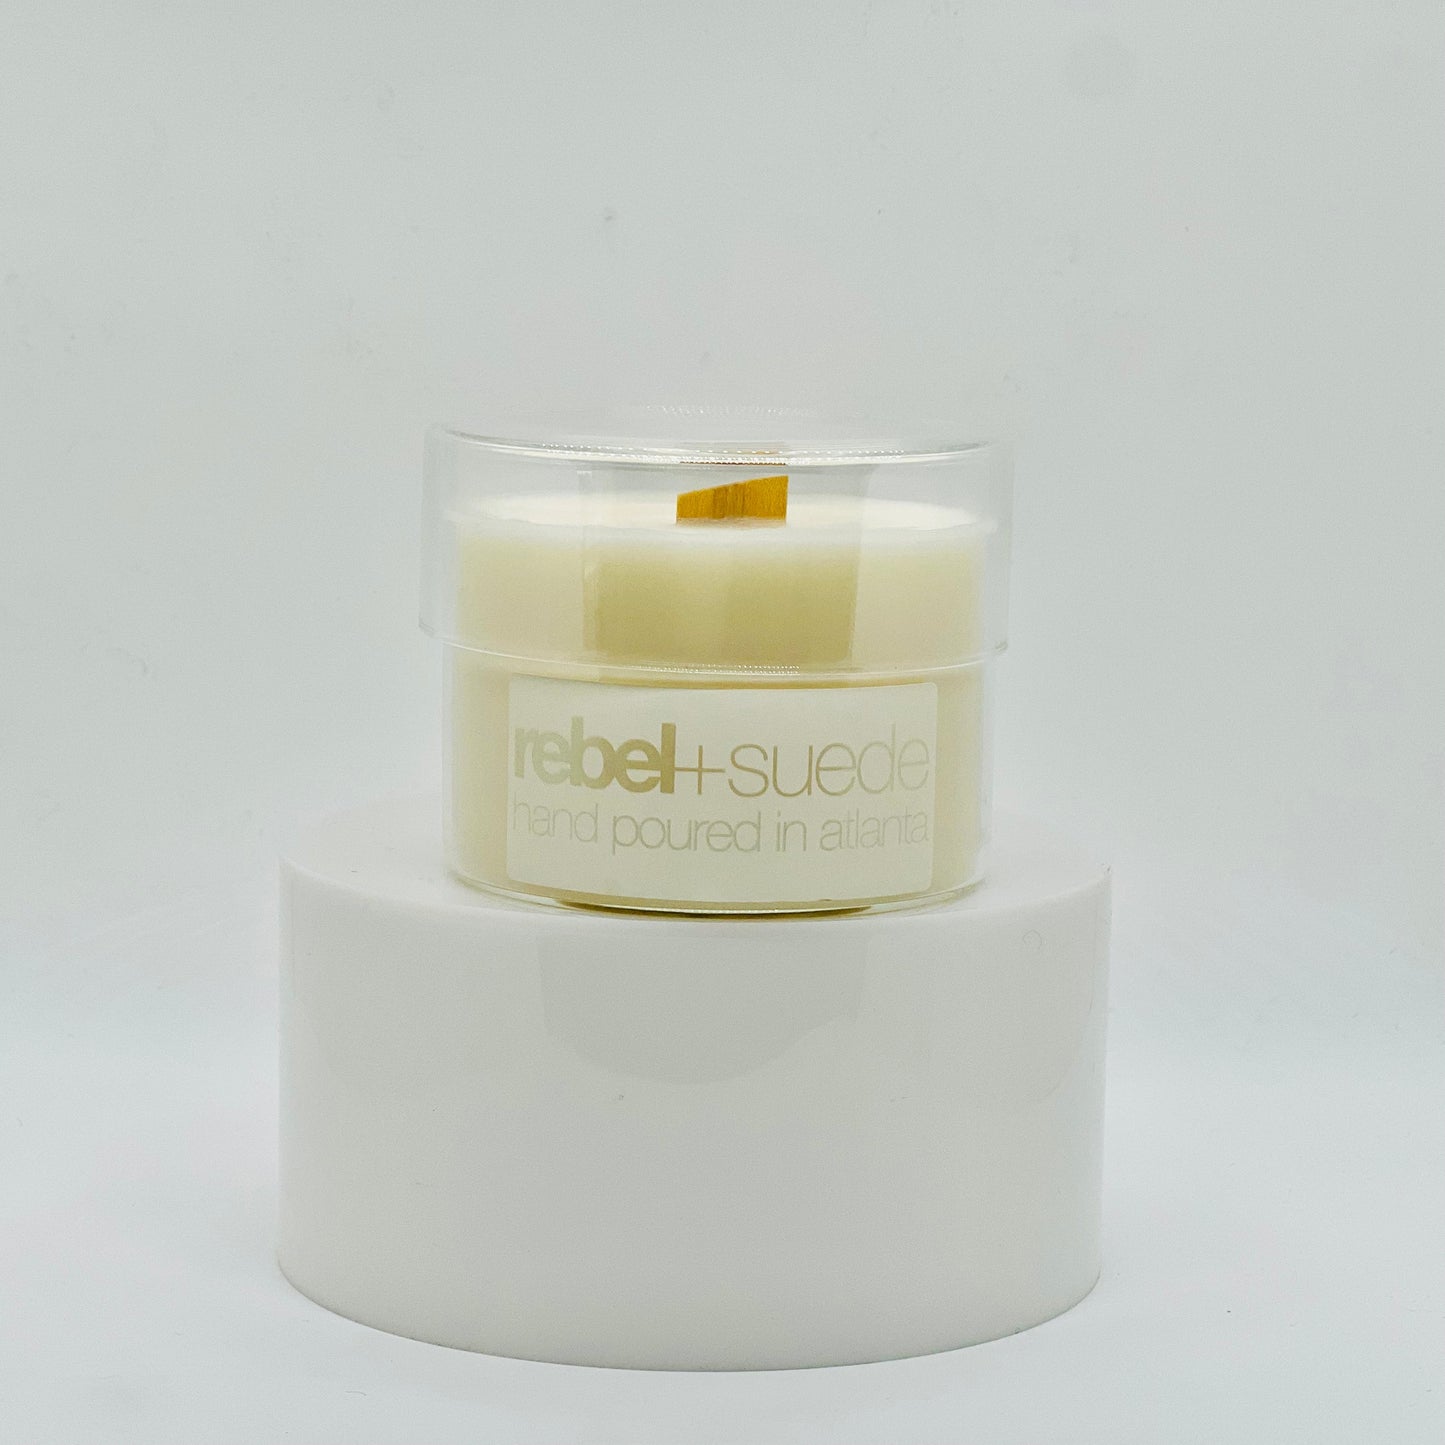 belief - rebel + suede | handcrafted candles | luxury candles